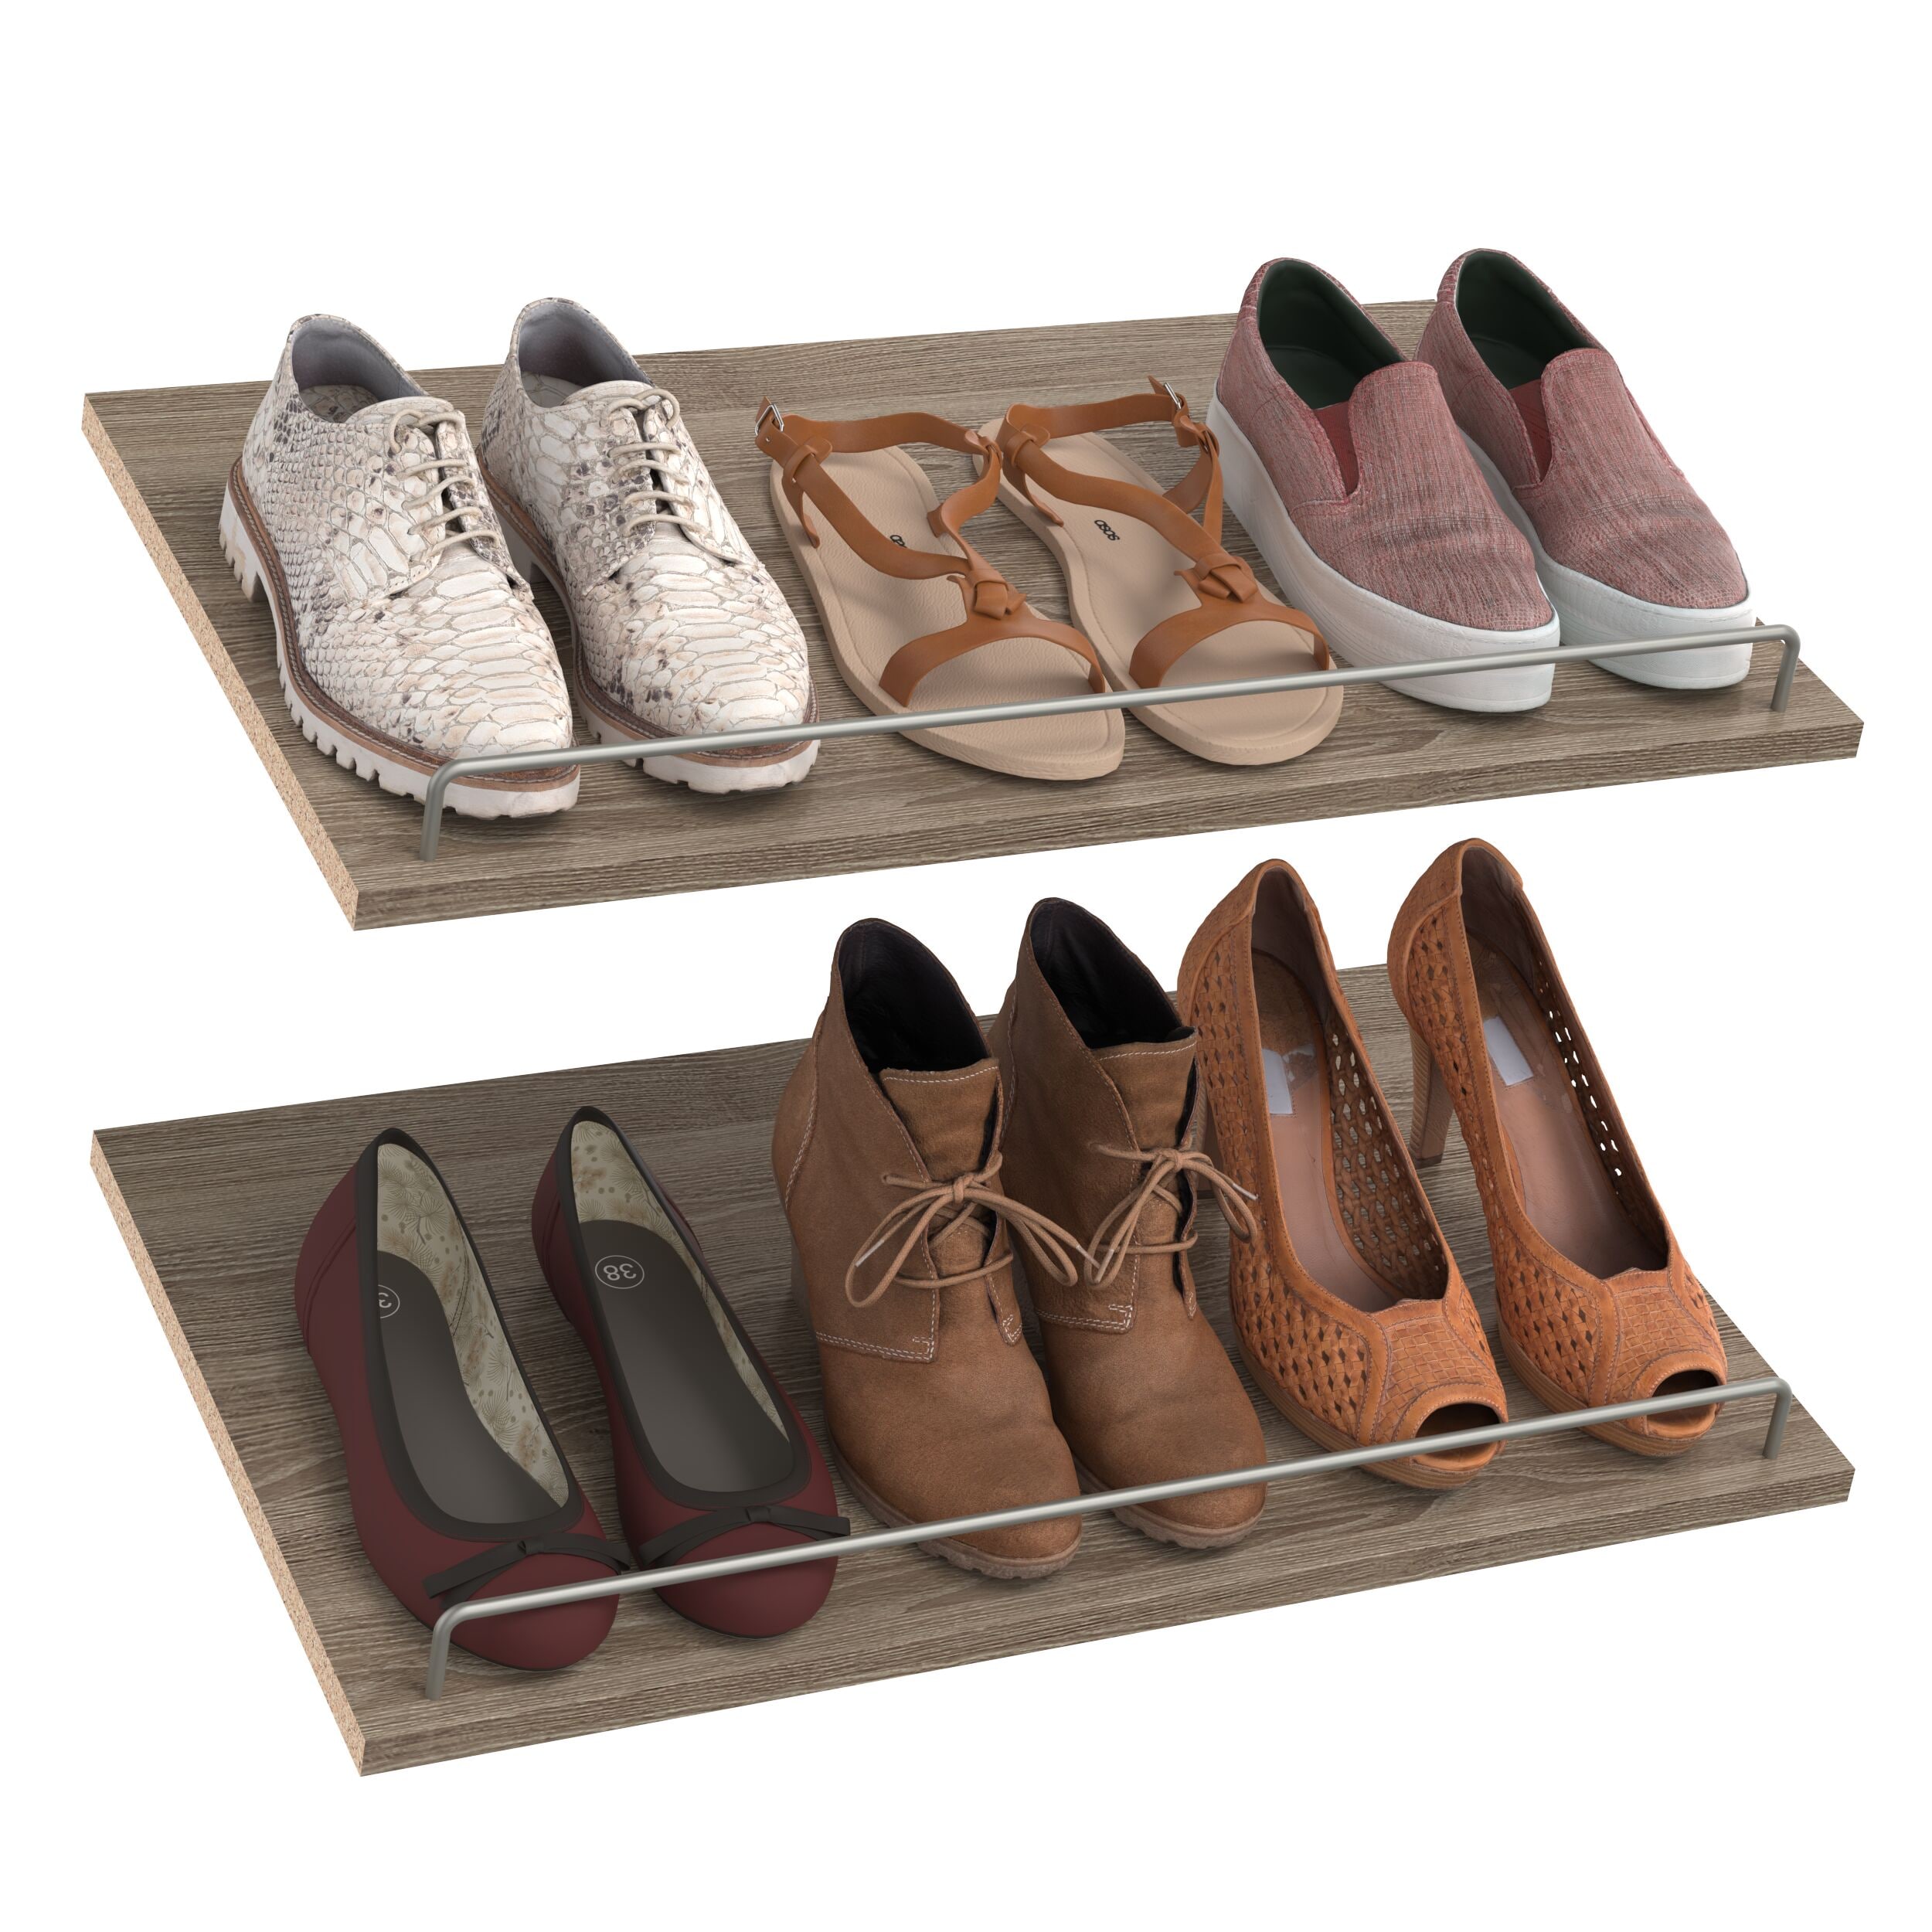 ClosetMaid BrightWood 25-in x 2.11-in x 13.8-in Latte Shoe Storage